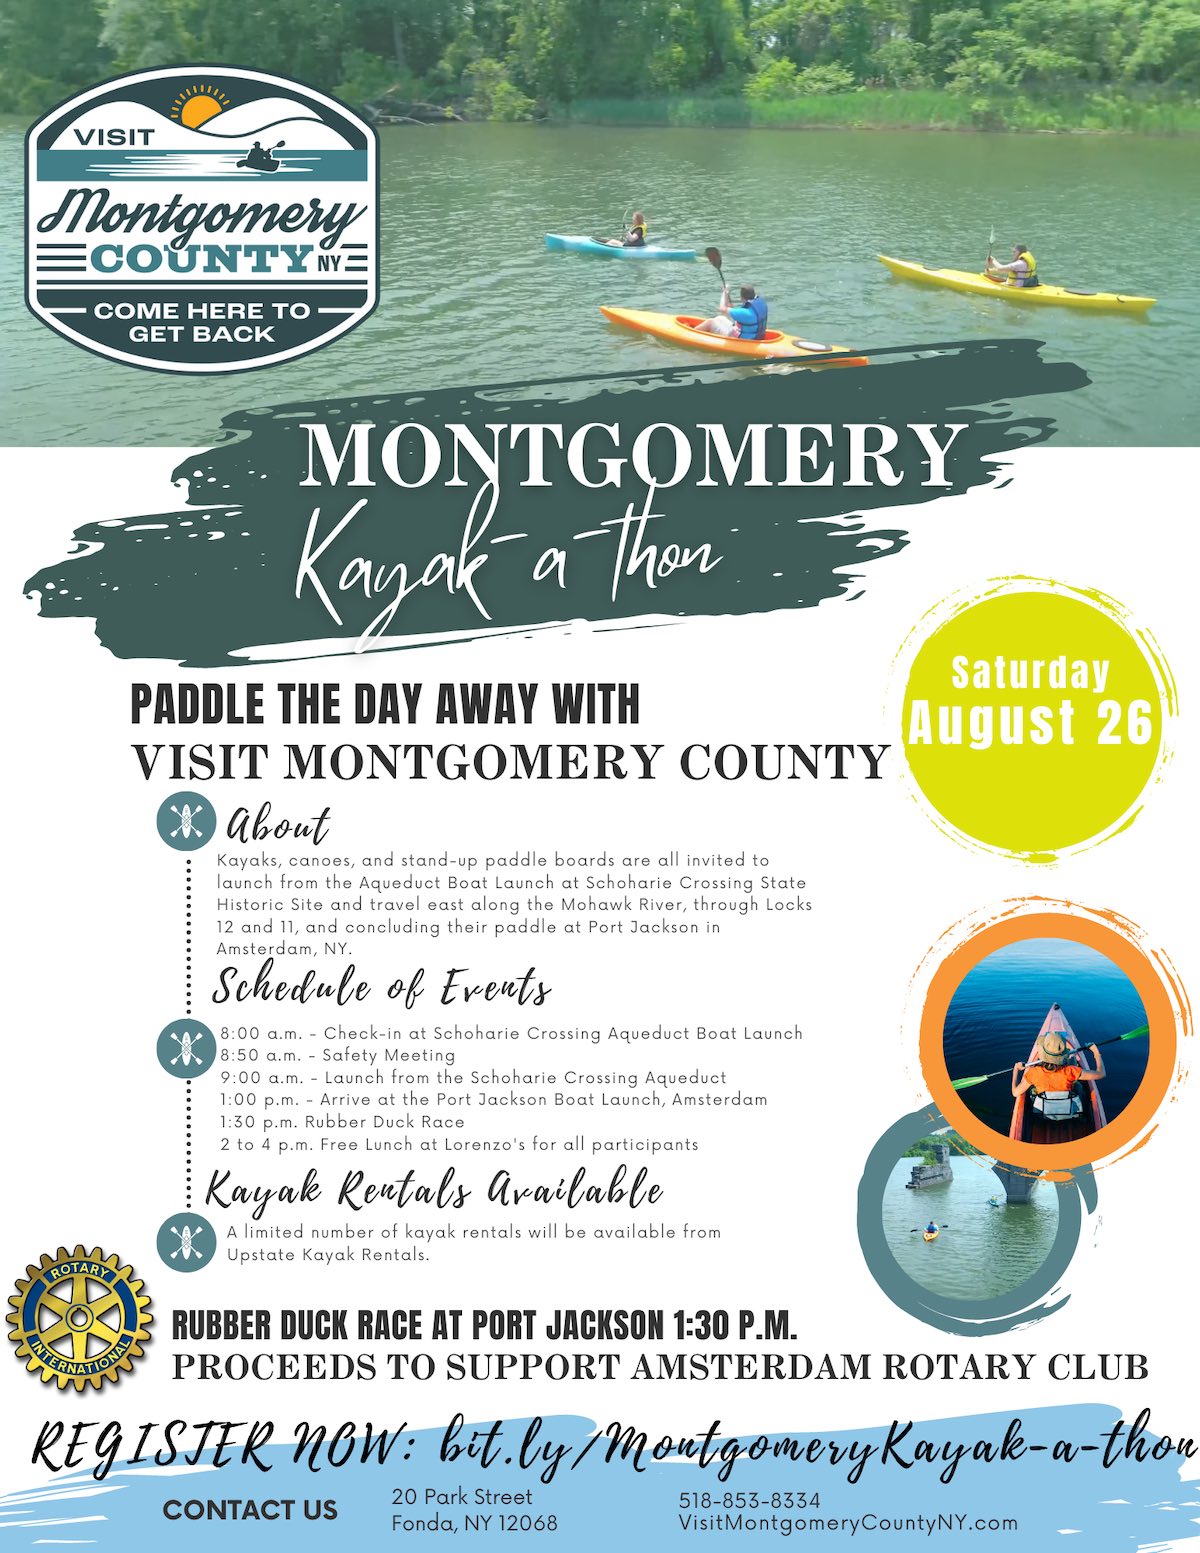 Montgomery County Kayak-a-thon Flyer